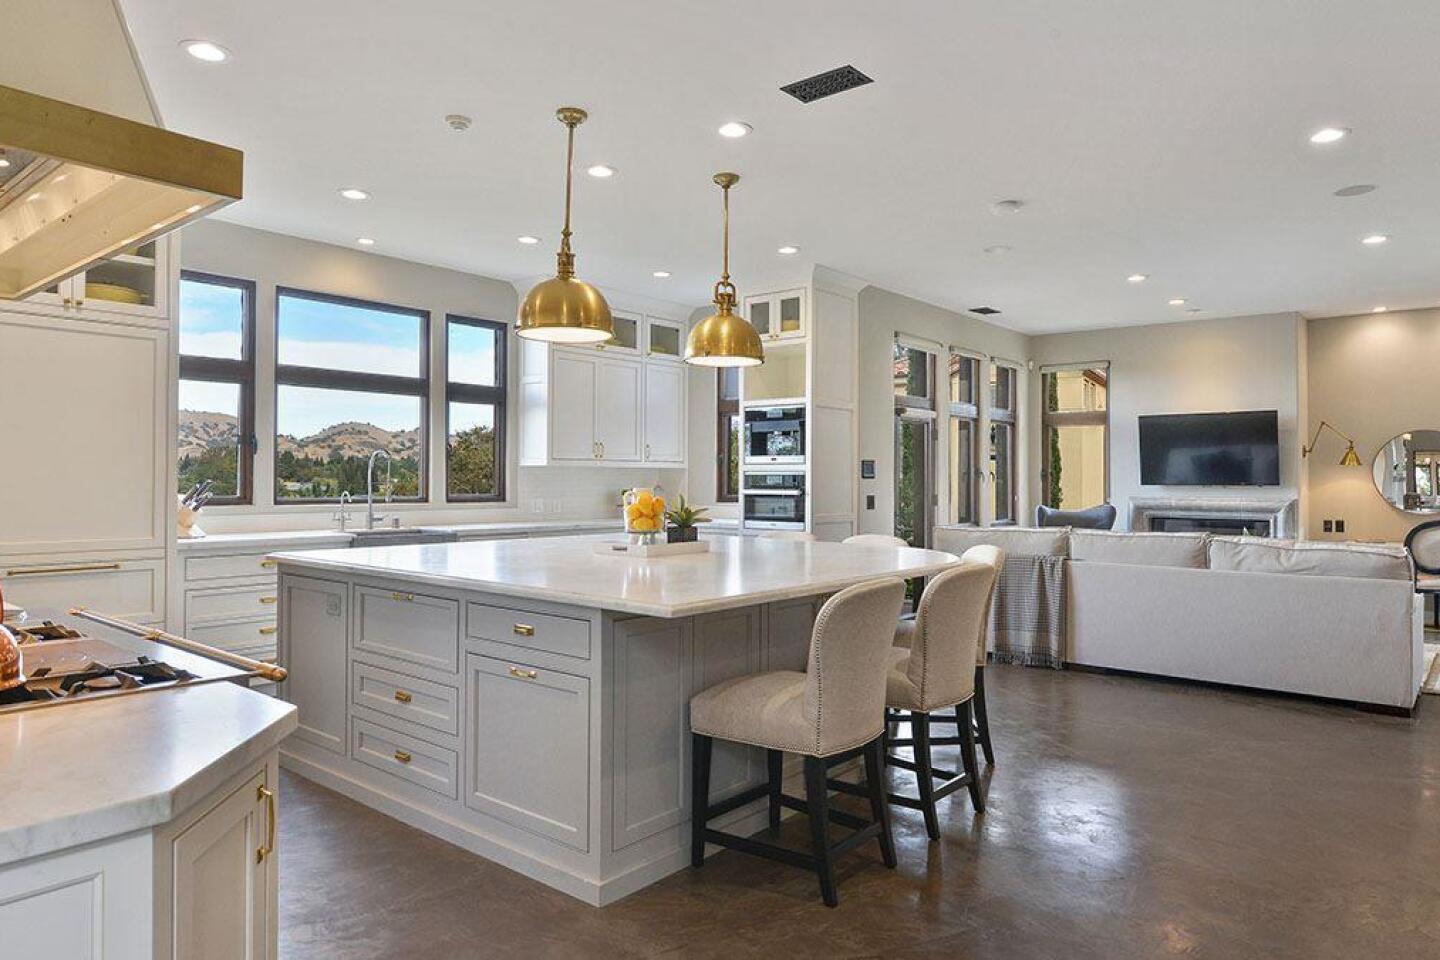 Photos: Ex-Golden State Warriors star selling California house